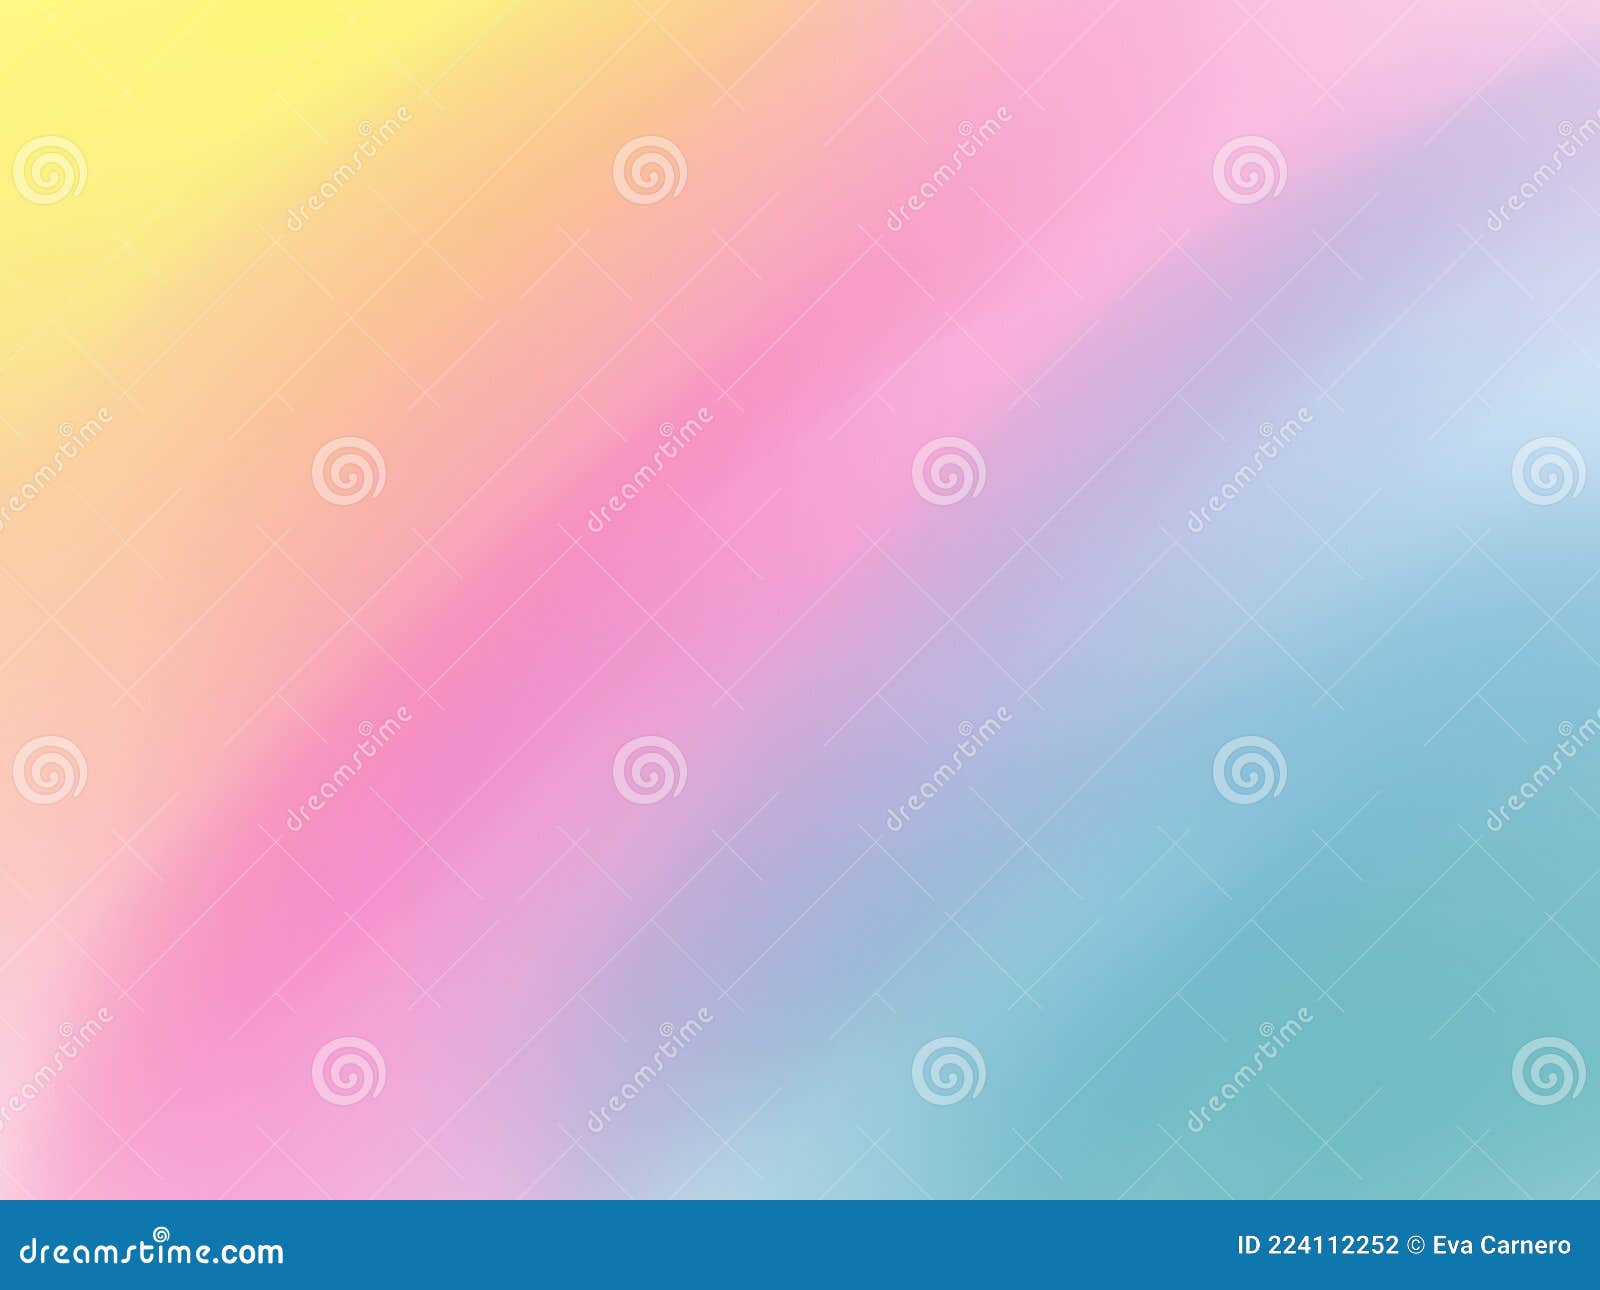 Download A burst of colors that will put a smile on your face Wallpaper   Wallpaperscom